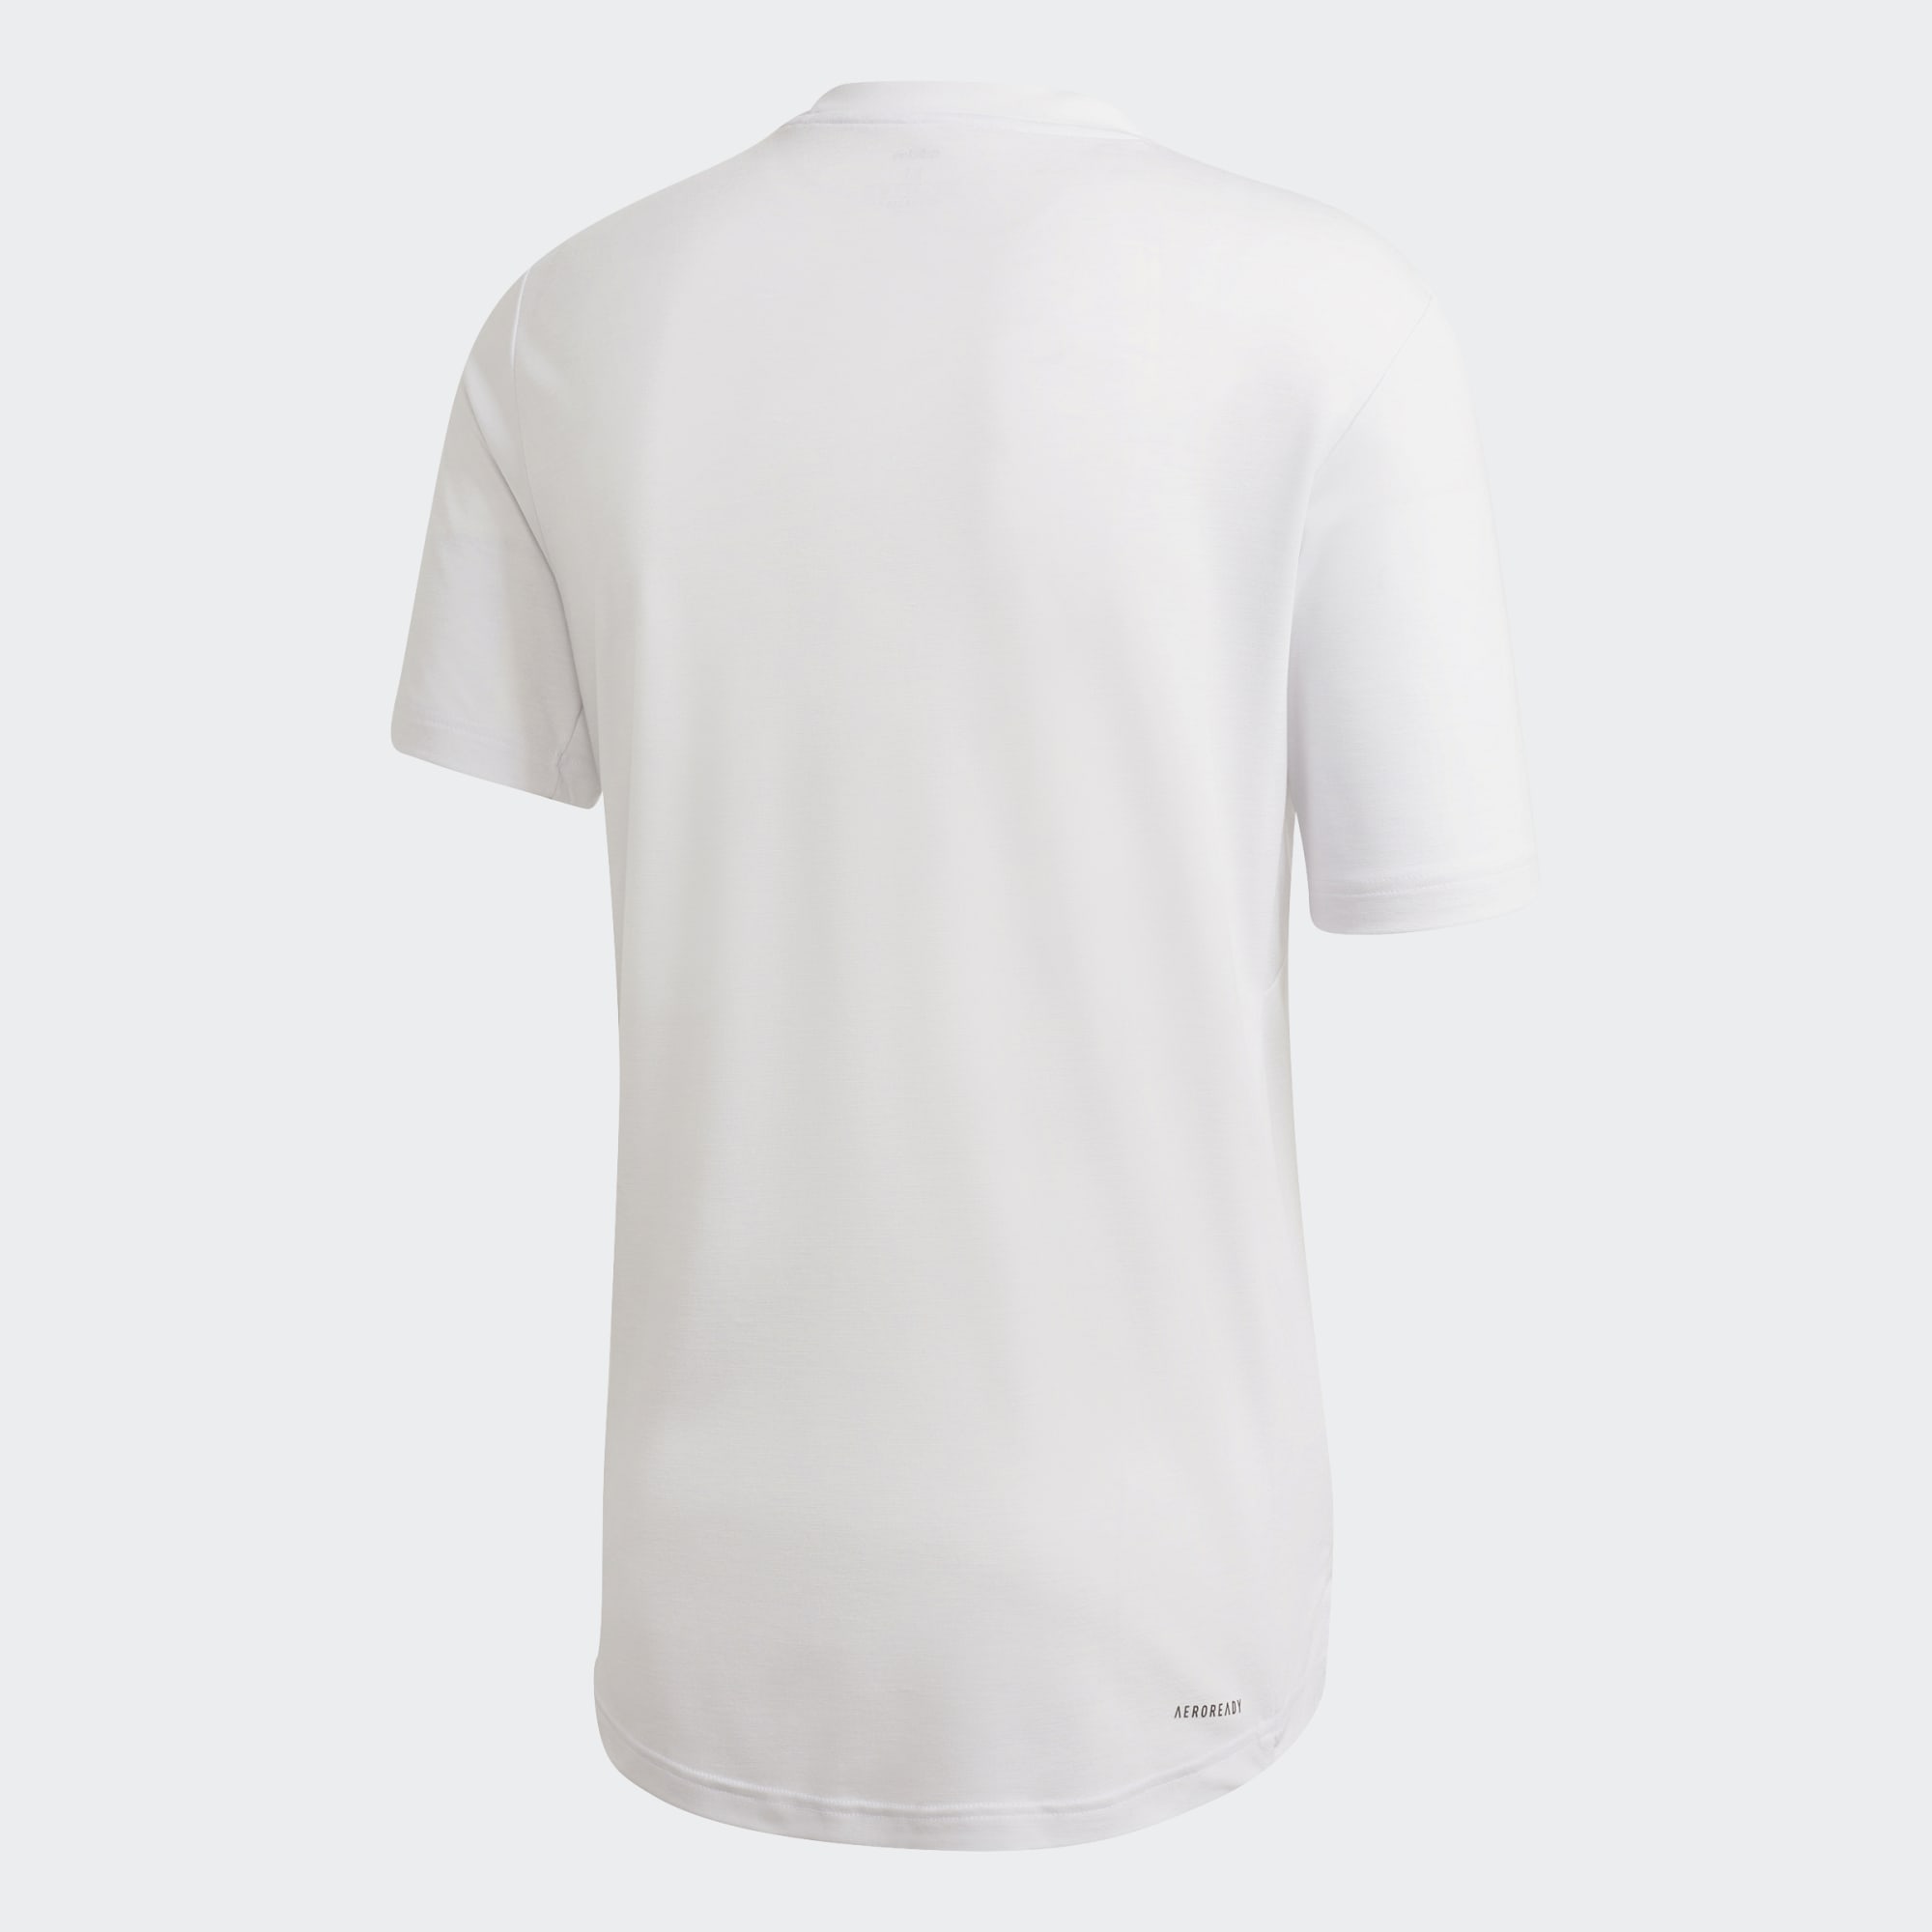 Activated tech tee white - sports gear | JustFittz